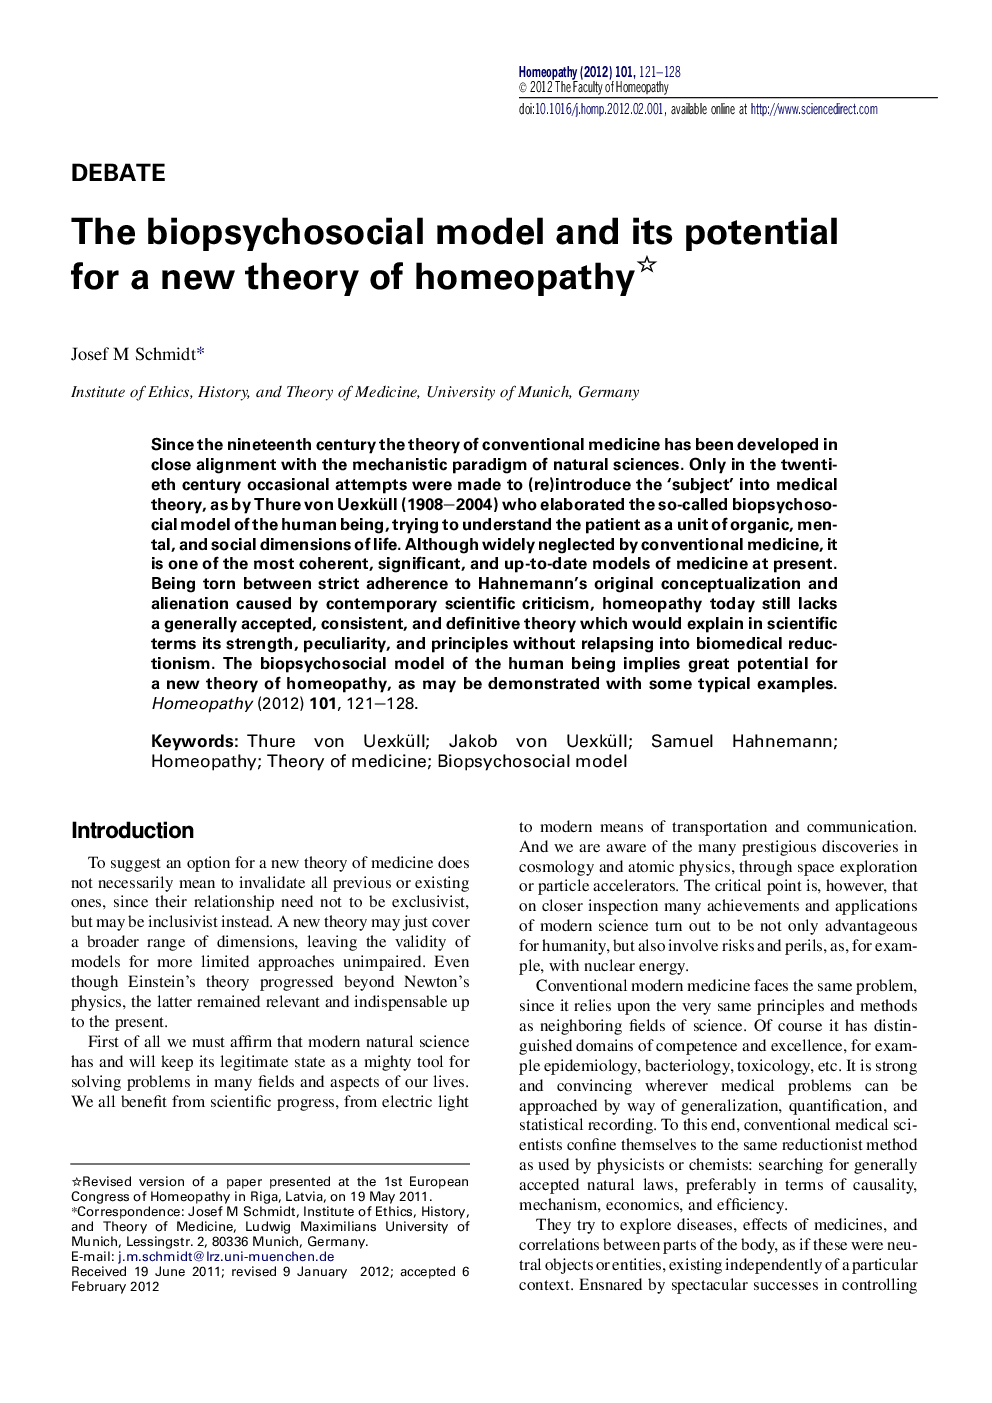 The biopsychosocial model and its potential for a new theory of homeopathy 